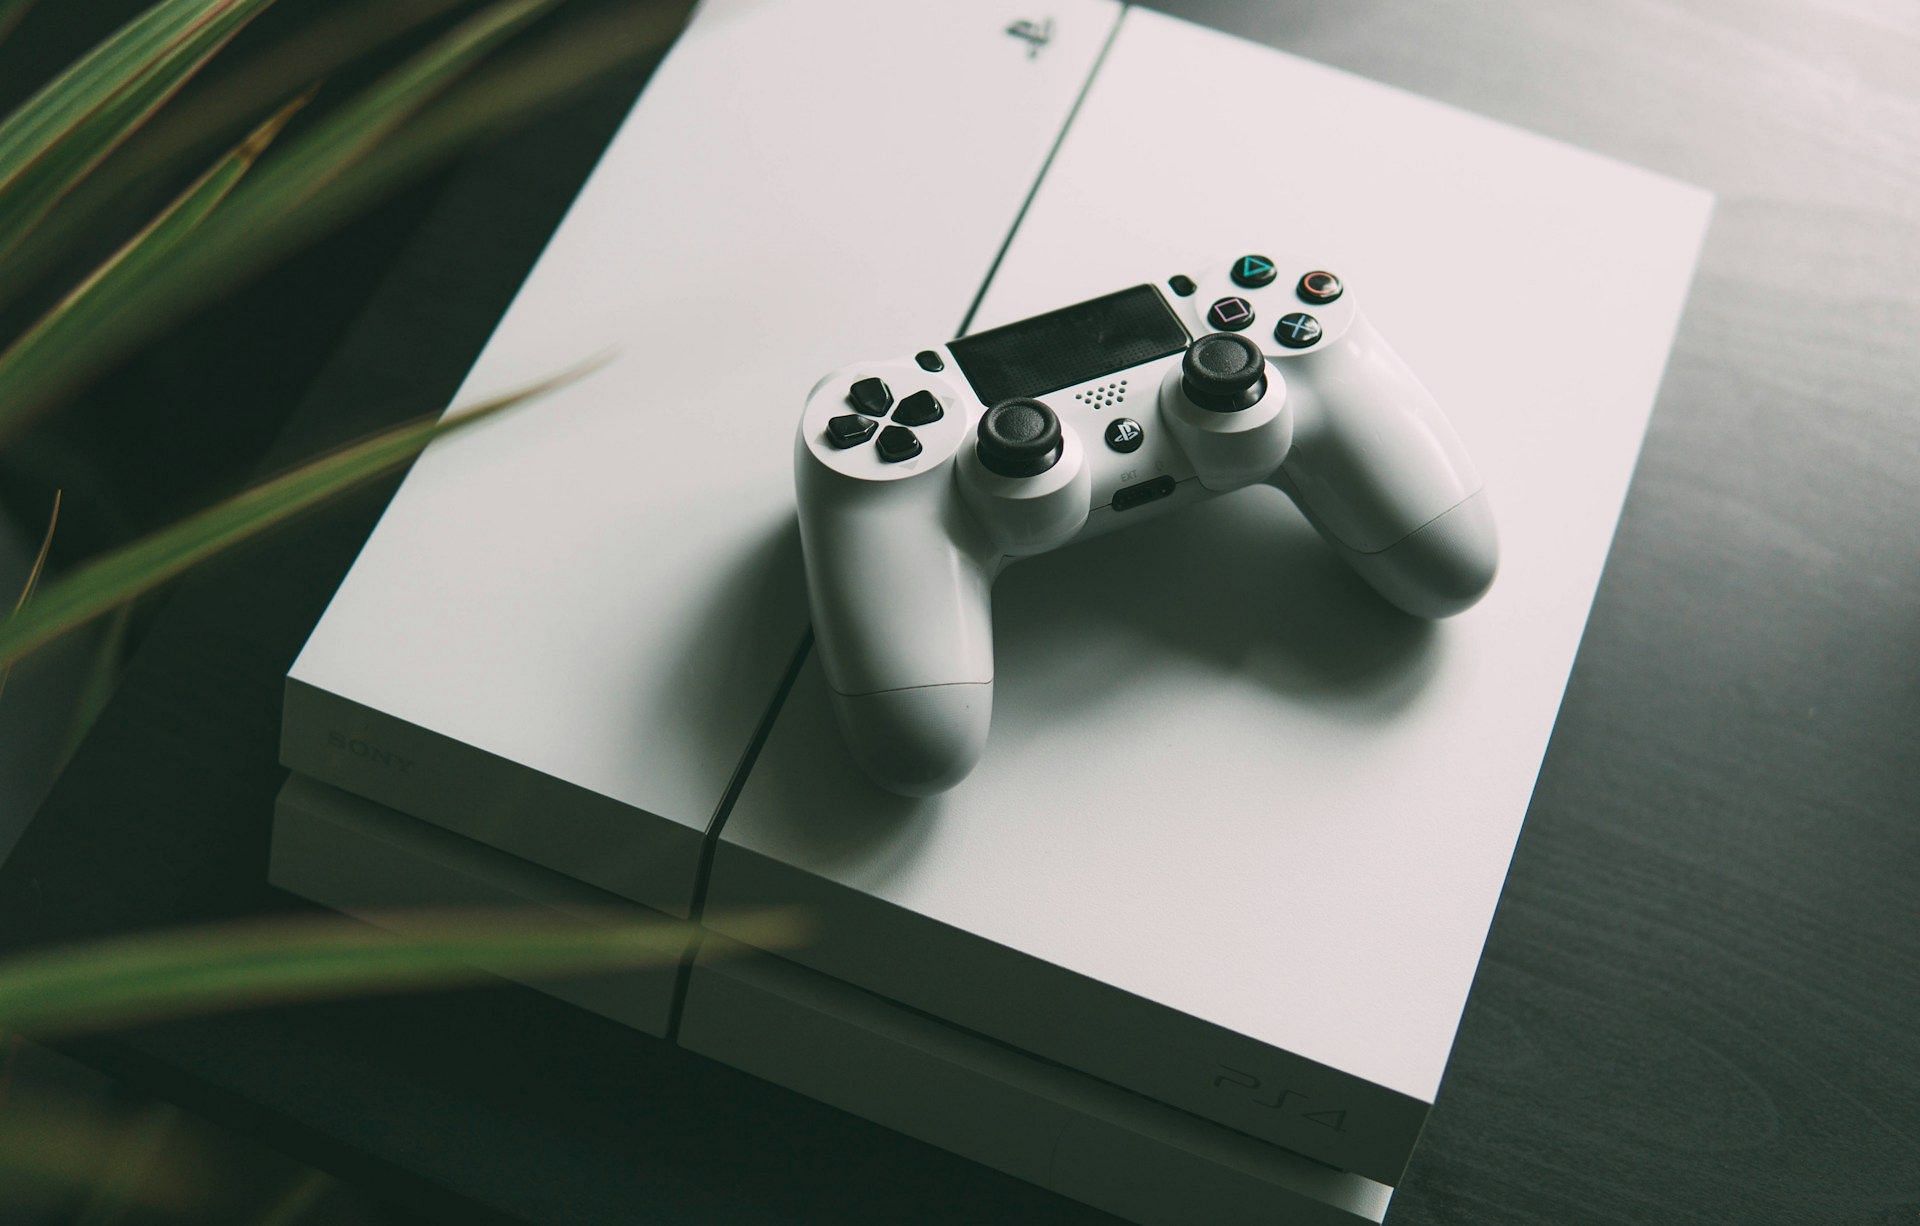 Sony&#039;s PS4 launched in 2013 (Image by Nikita Kachanovsky from Unsplash)